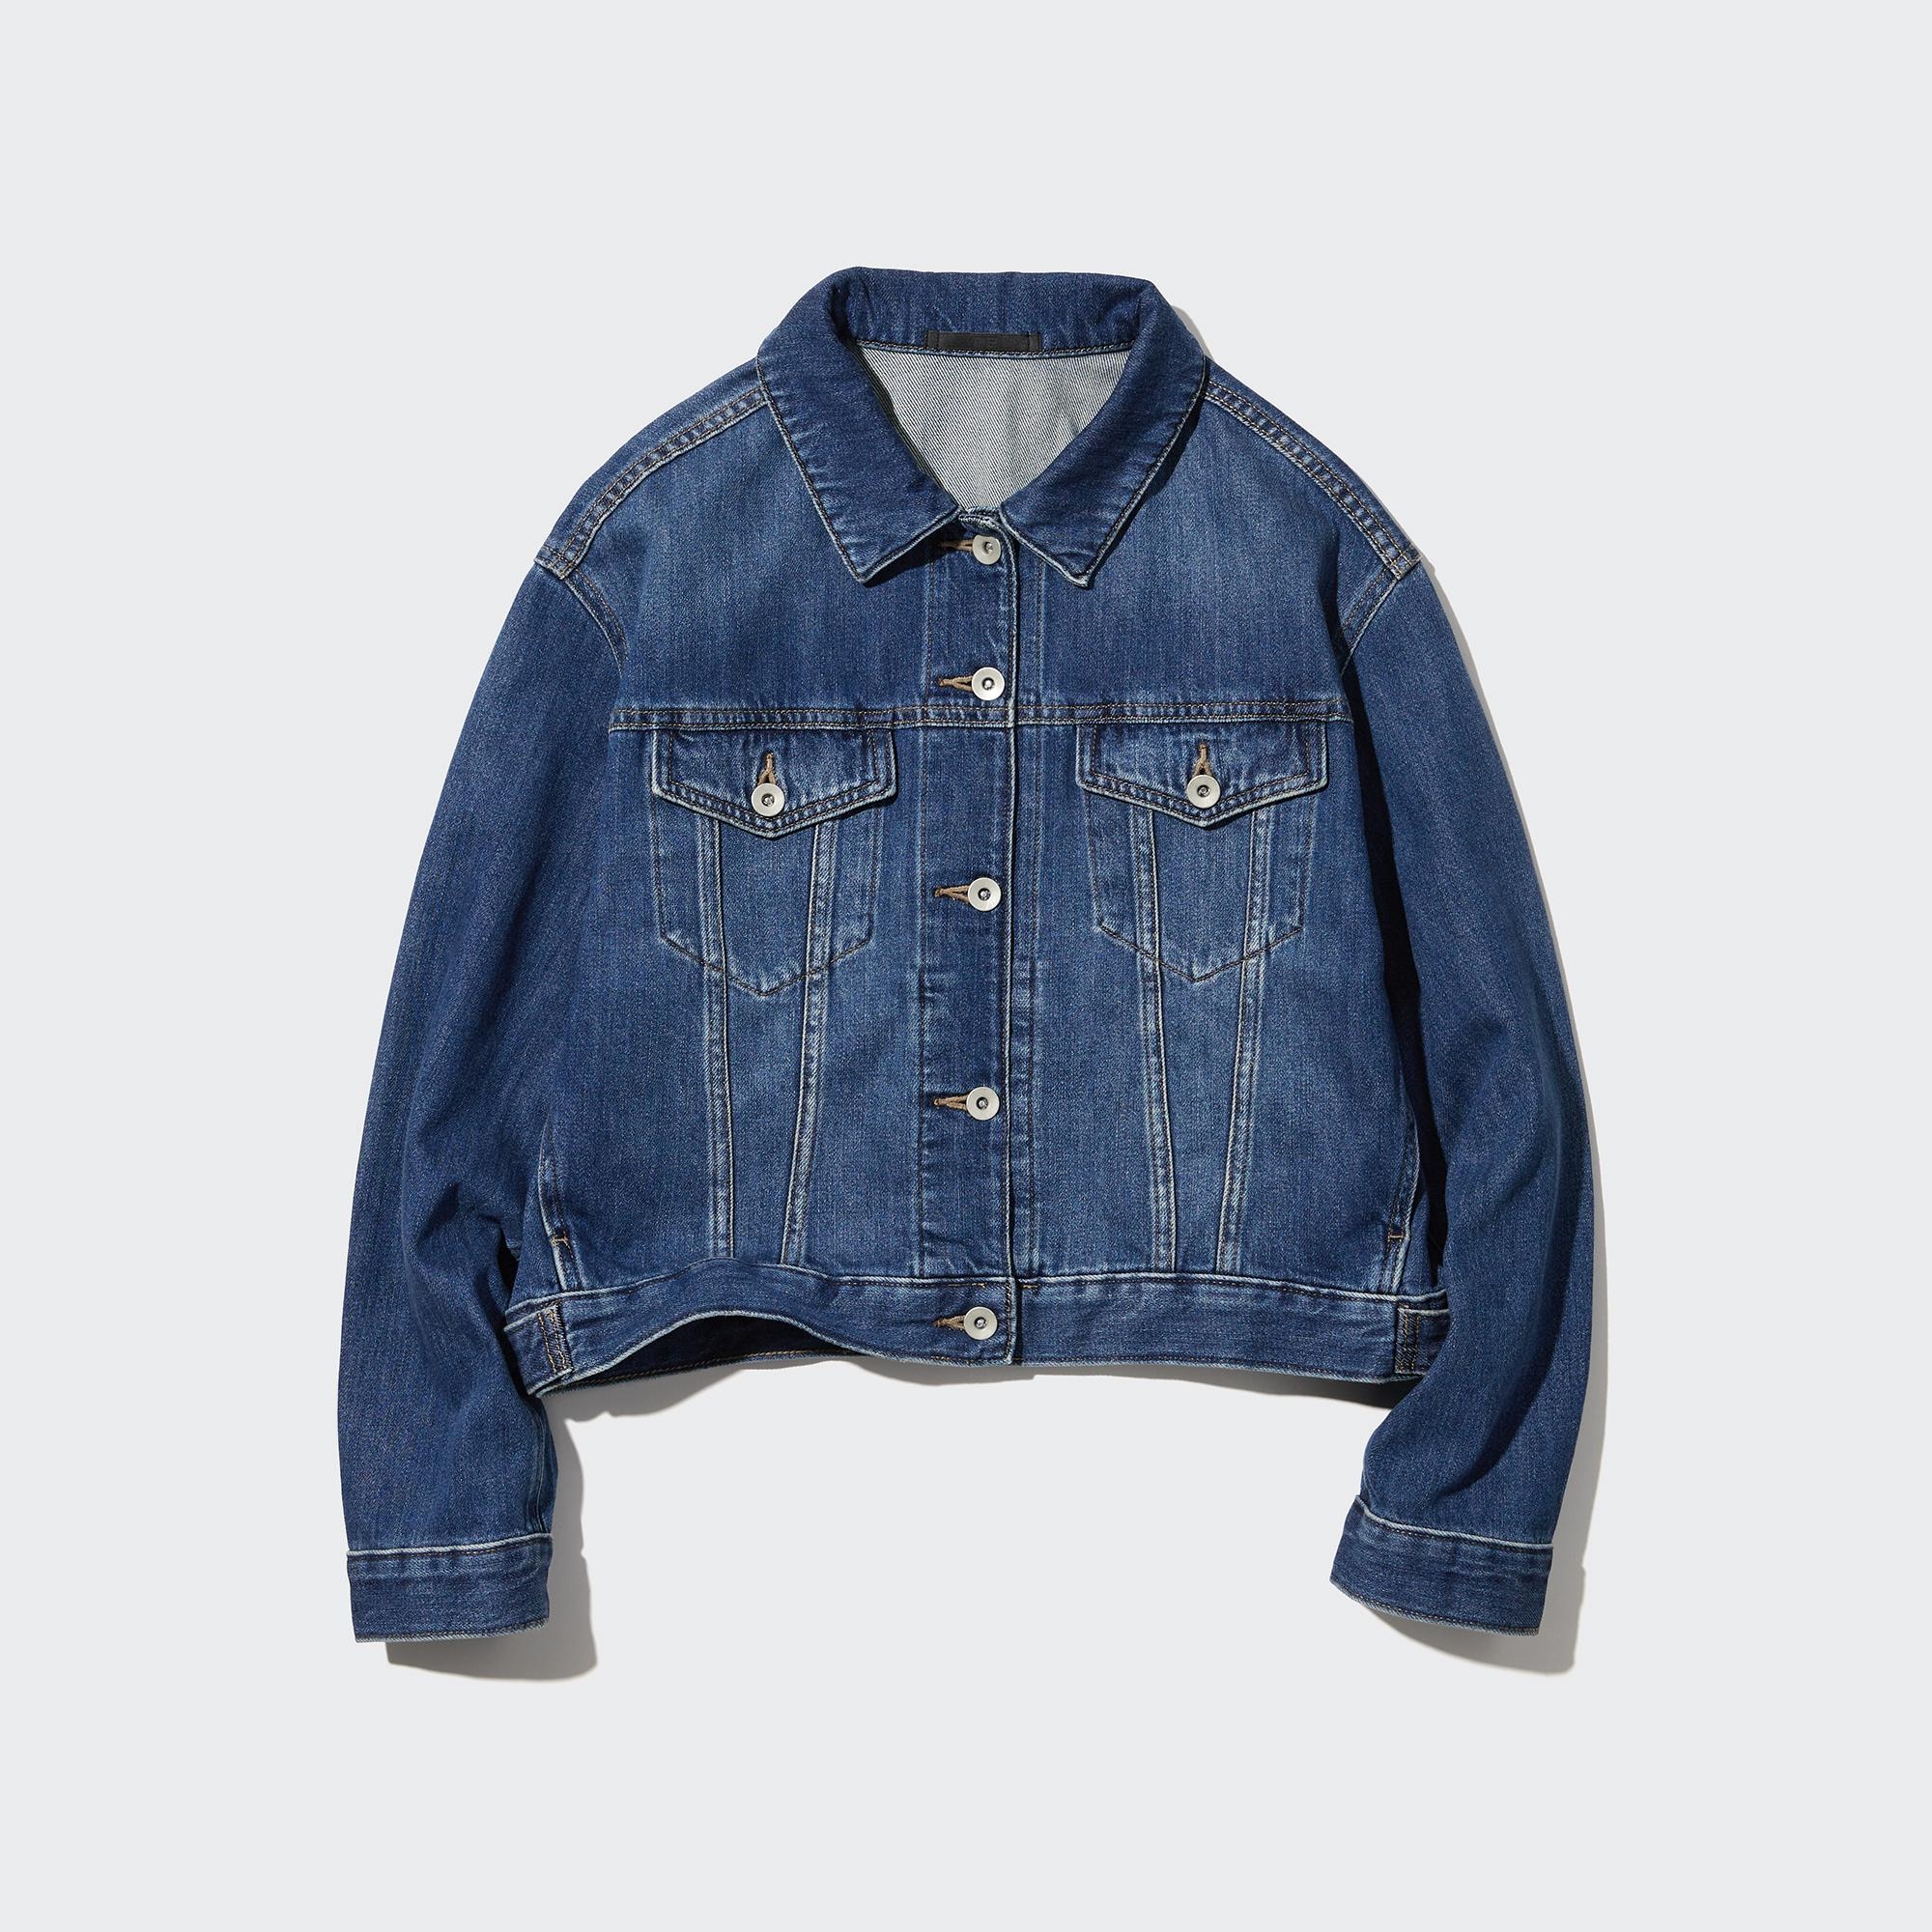 10 Stylish Ways to Wear a Jean Jacket This Summer